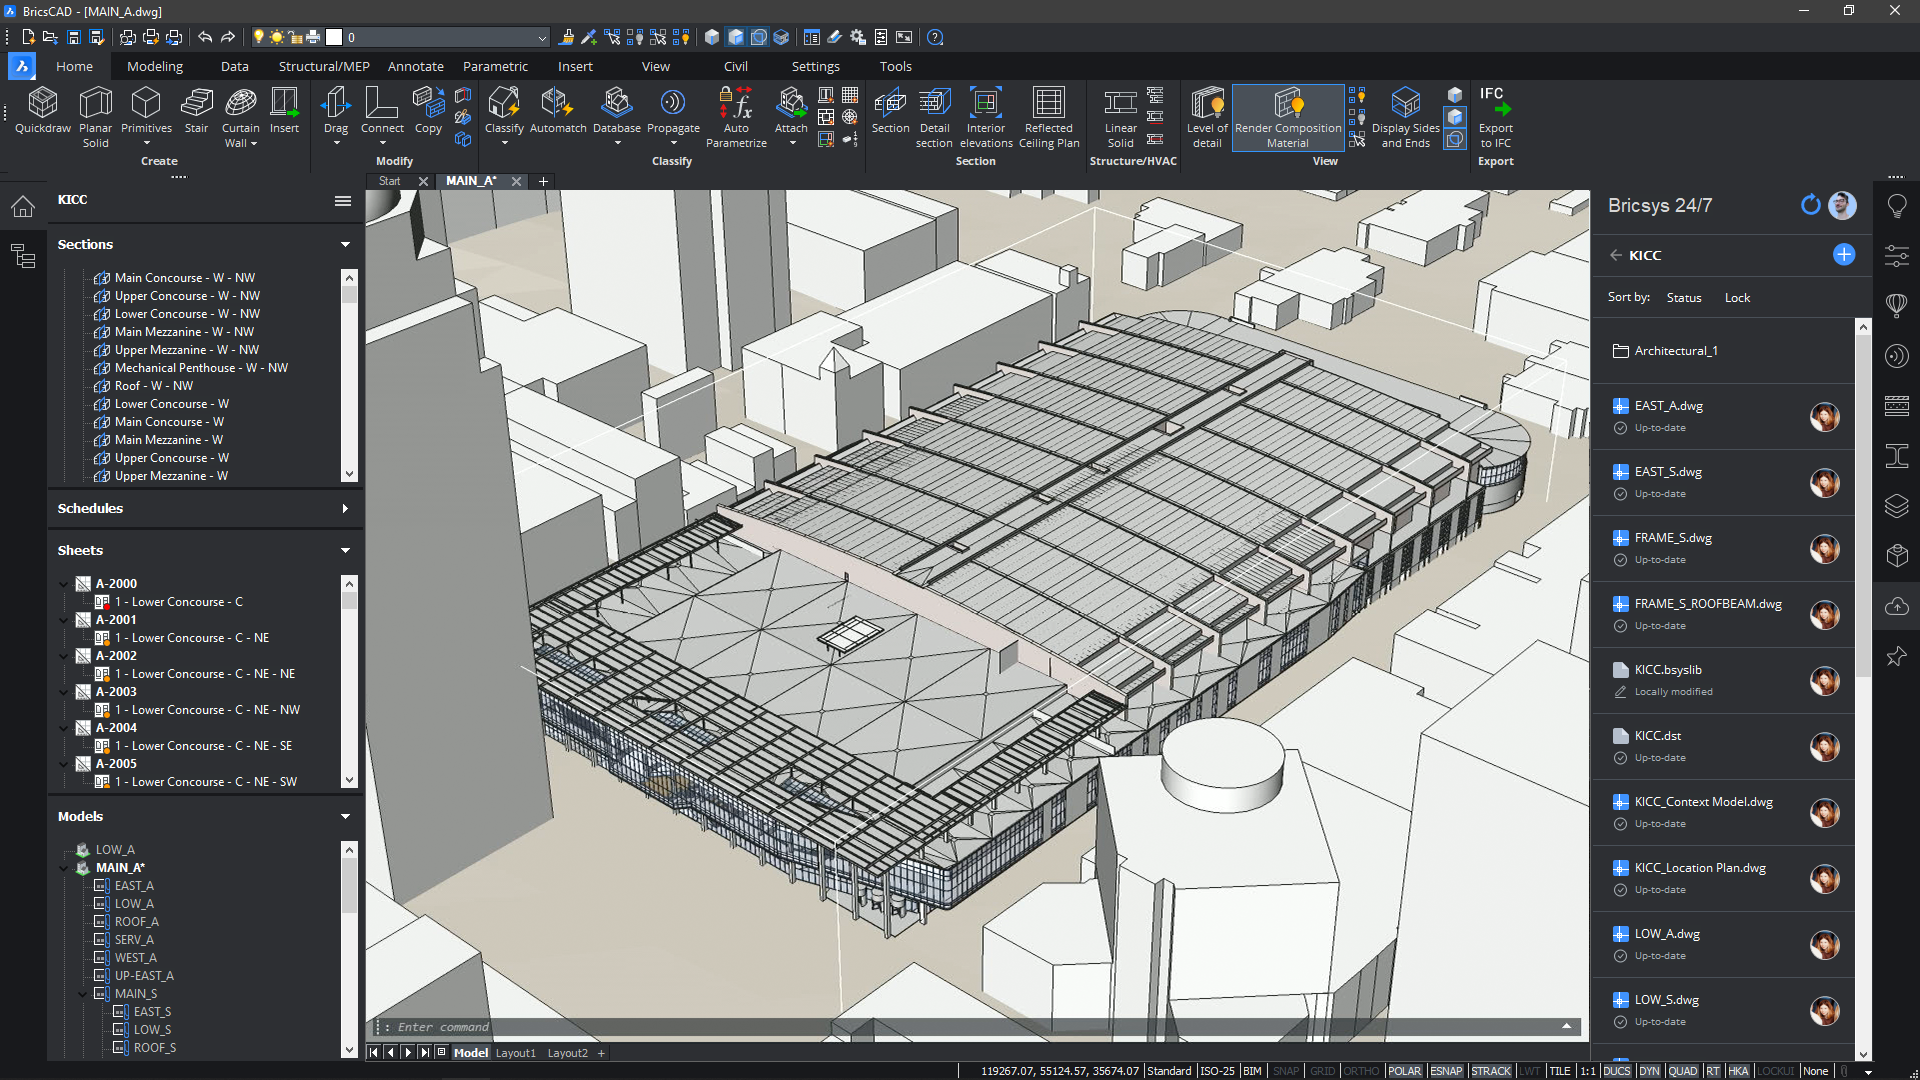 BricsCad Ultimate 23.2.06.1 for apple download free